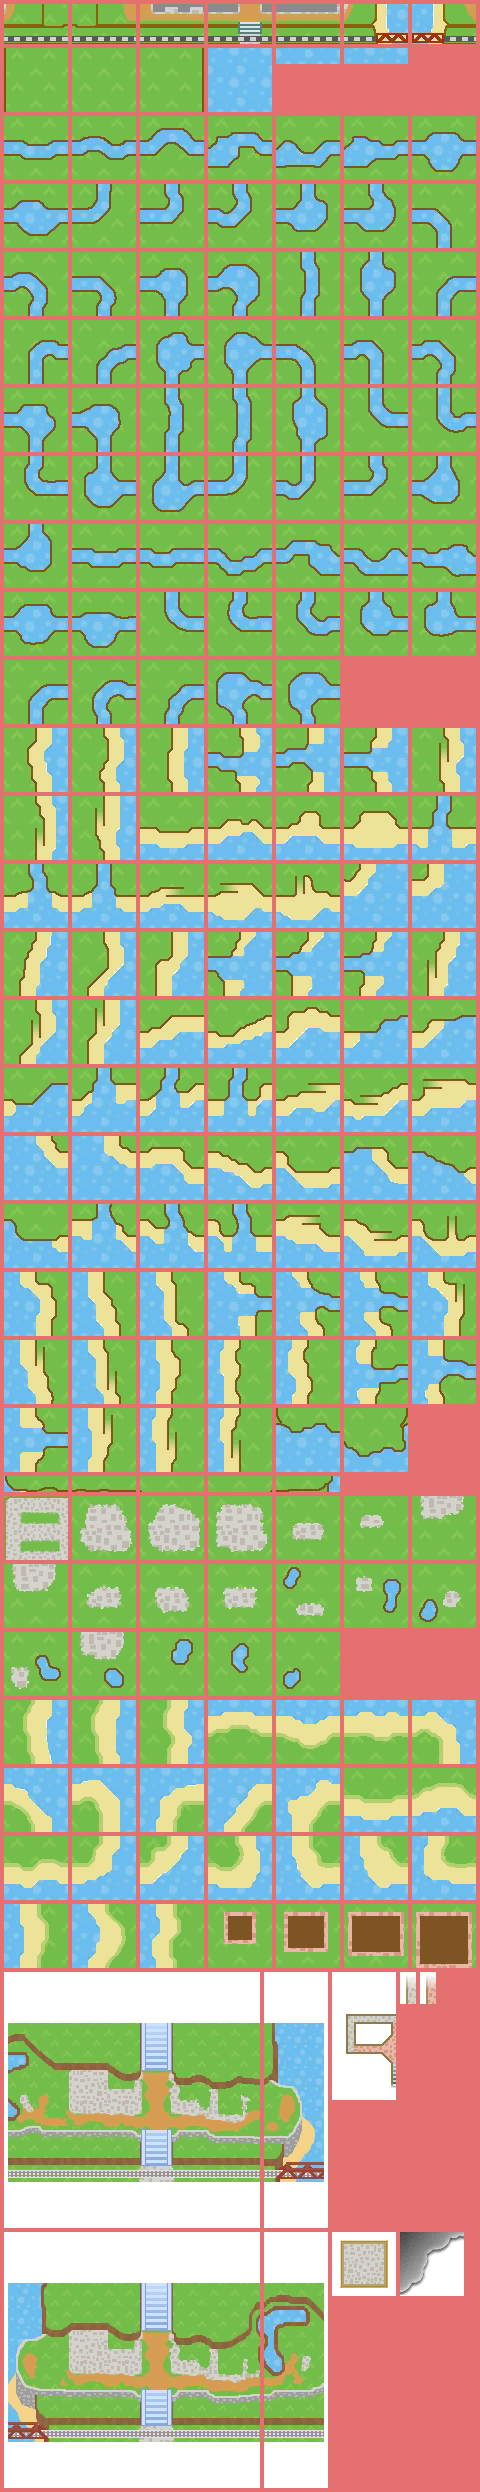 Animal Crossing: New Leaf - Map Acres